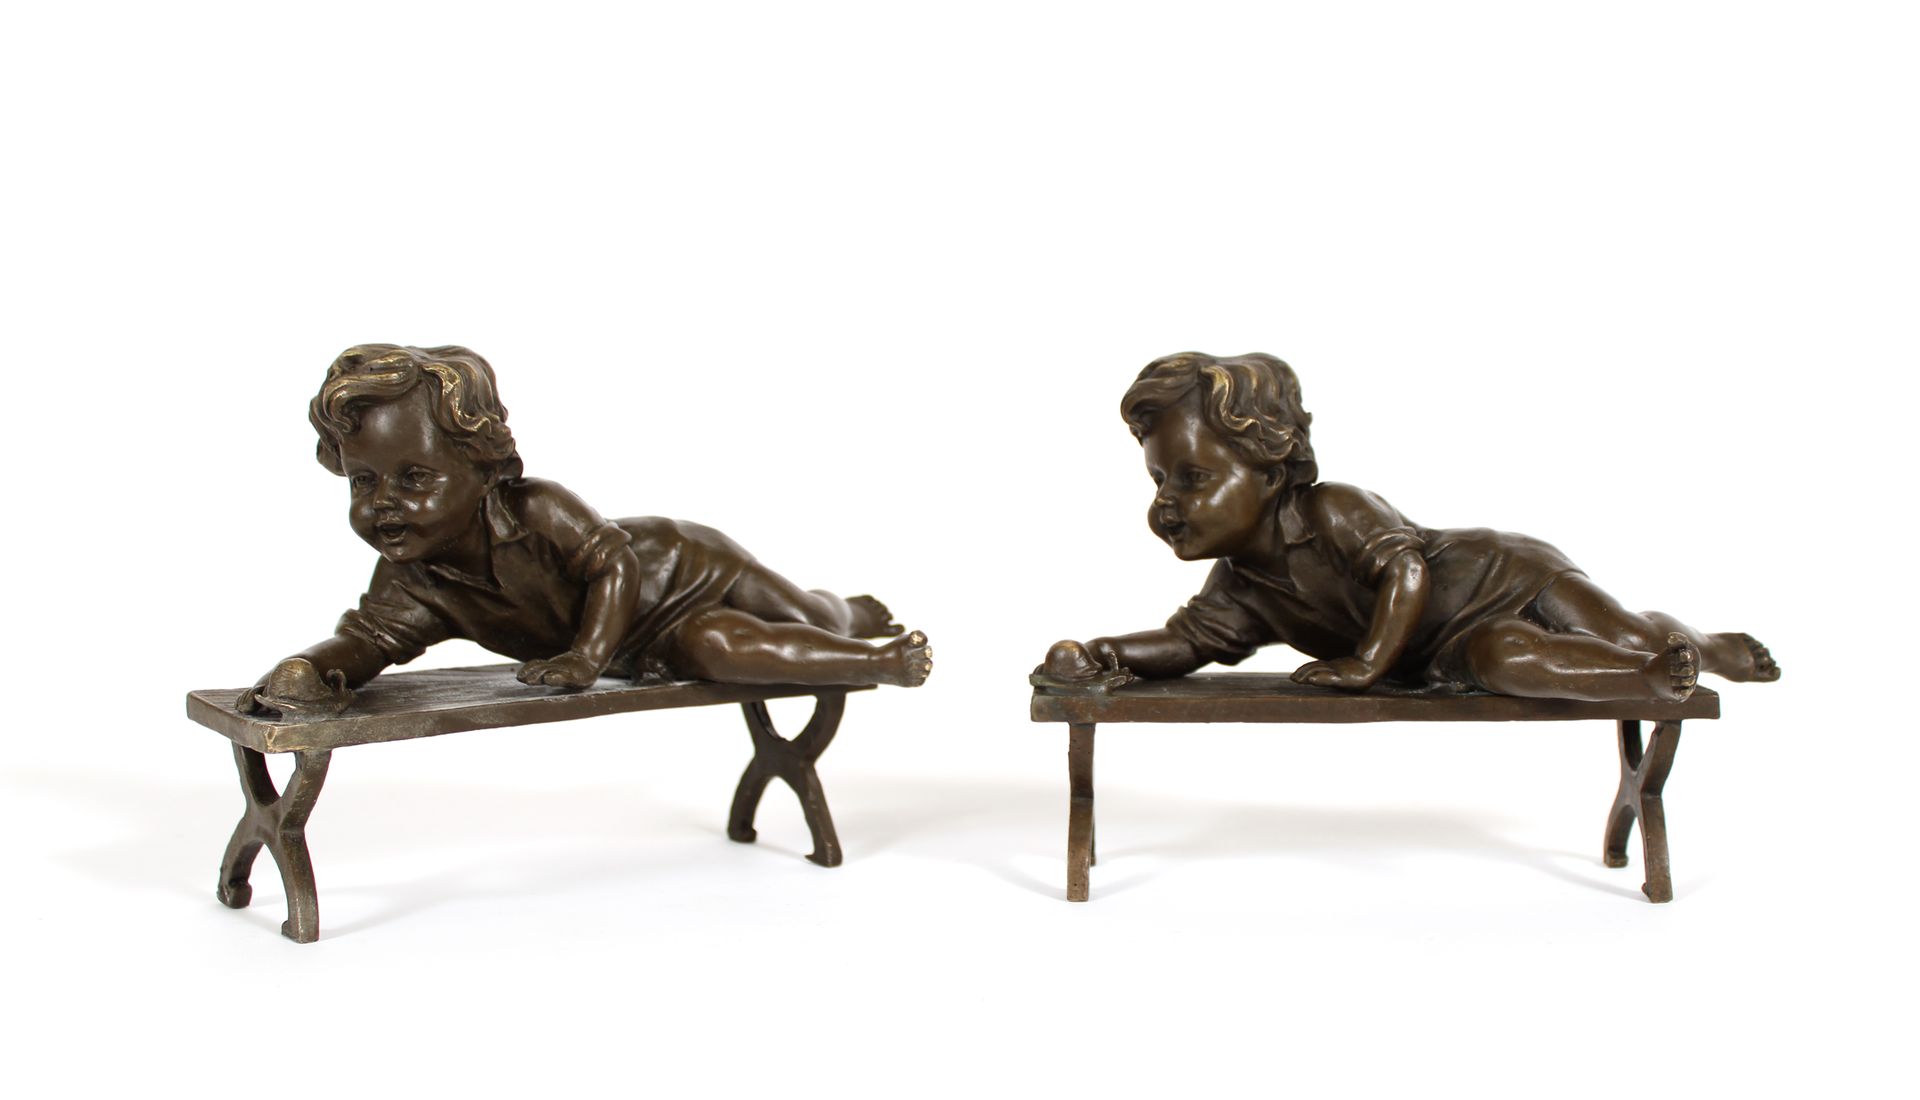 Null M. LECONNETI (20th century school)
Children on benches
Bronze, medal patina&hellip;